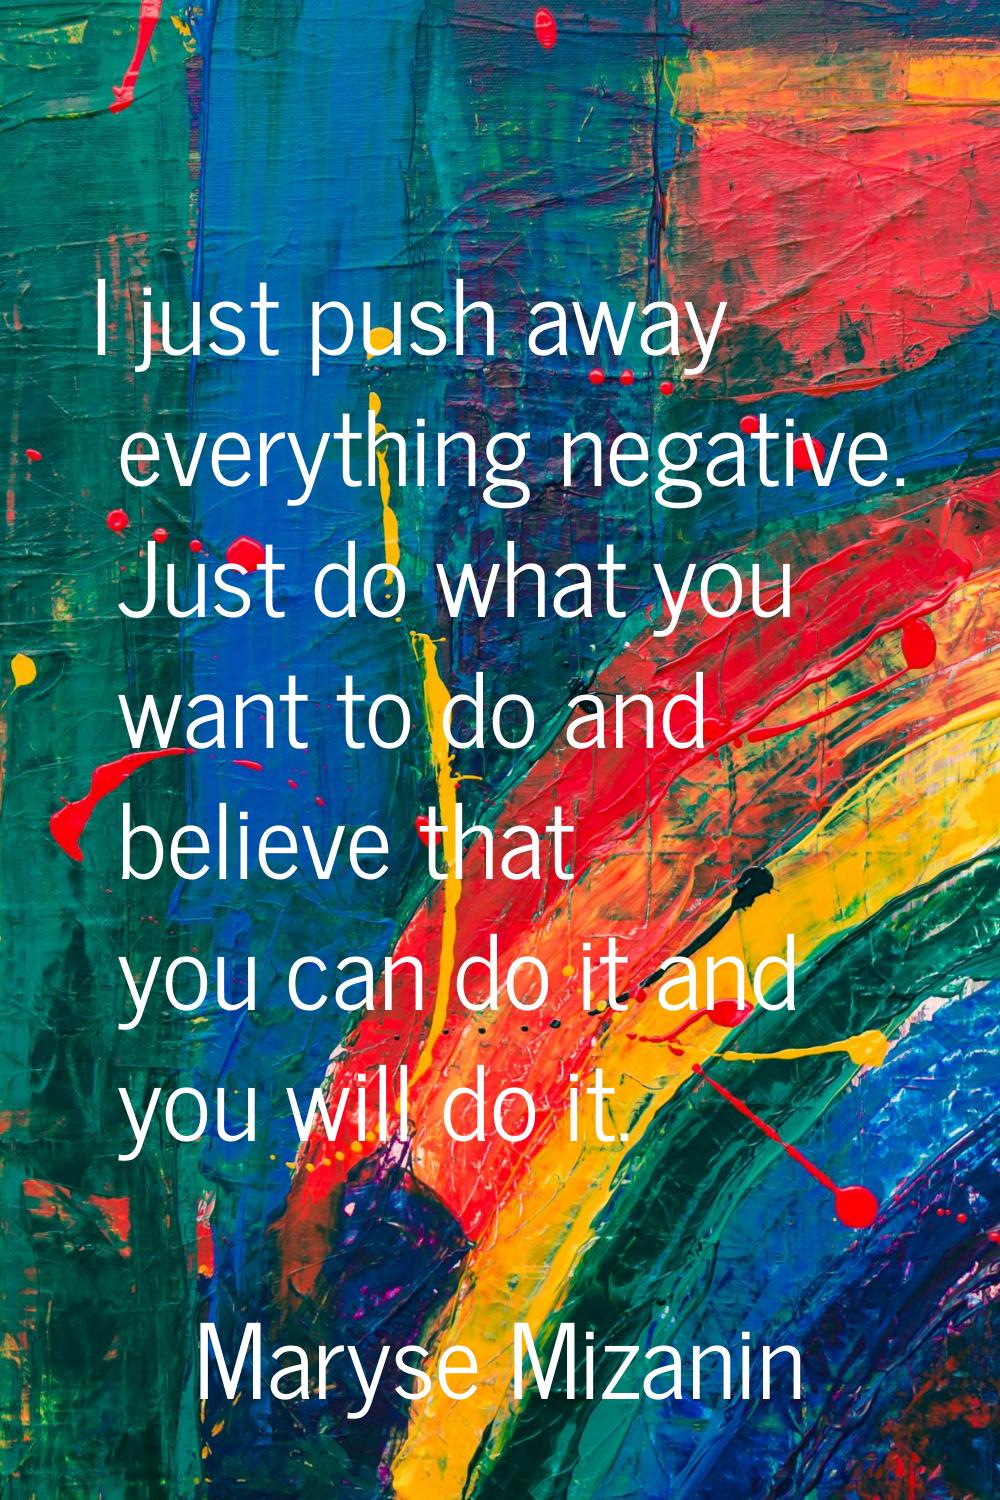 I just push away everything negative. Just do what you want to do and believe that you can do it an